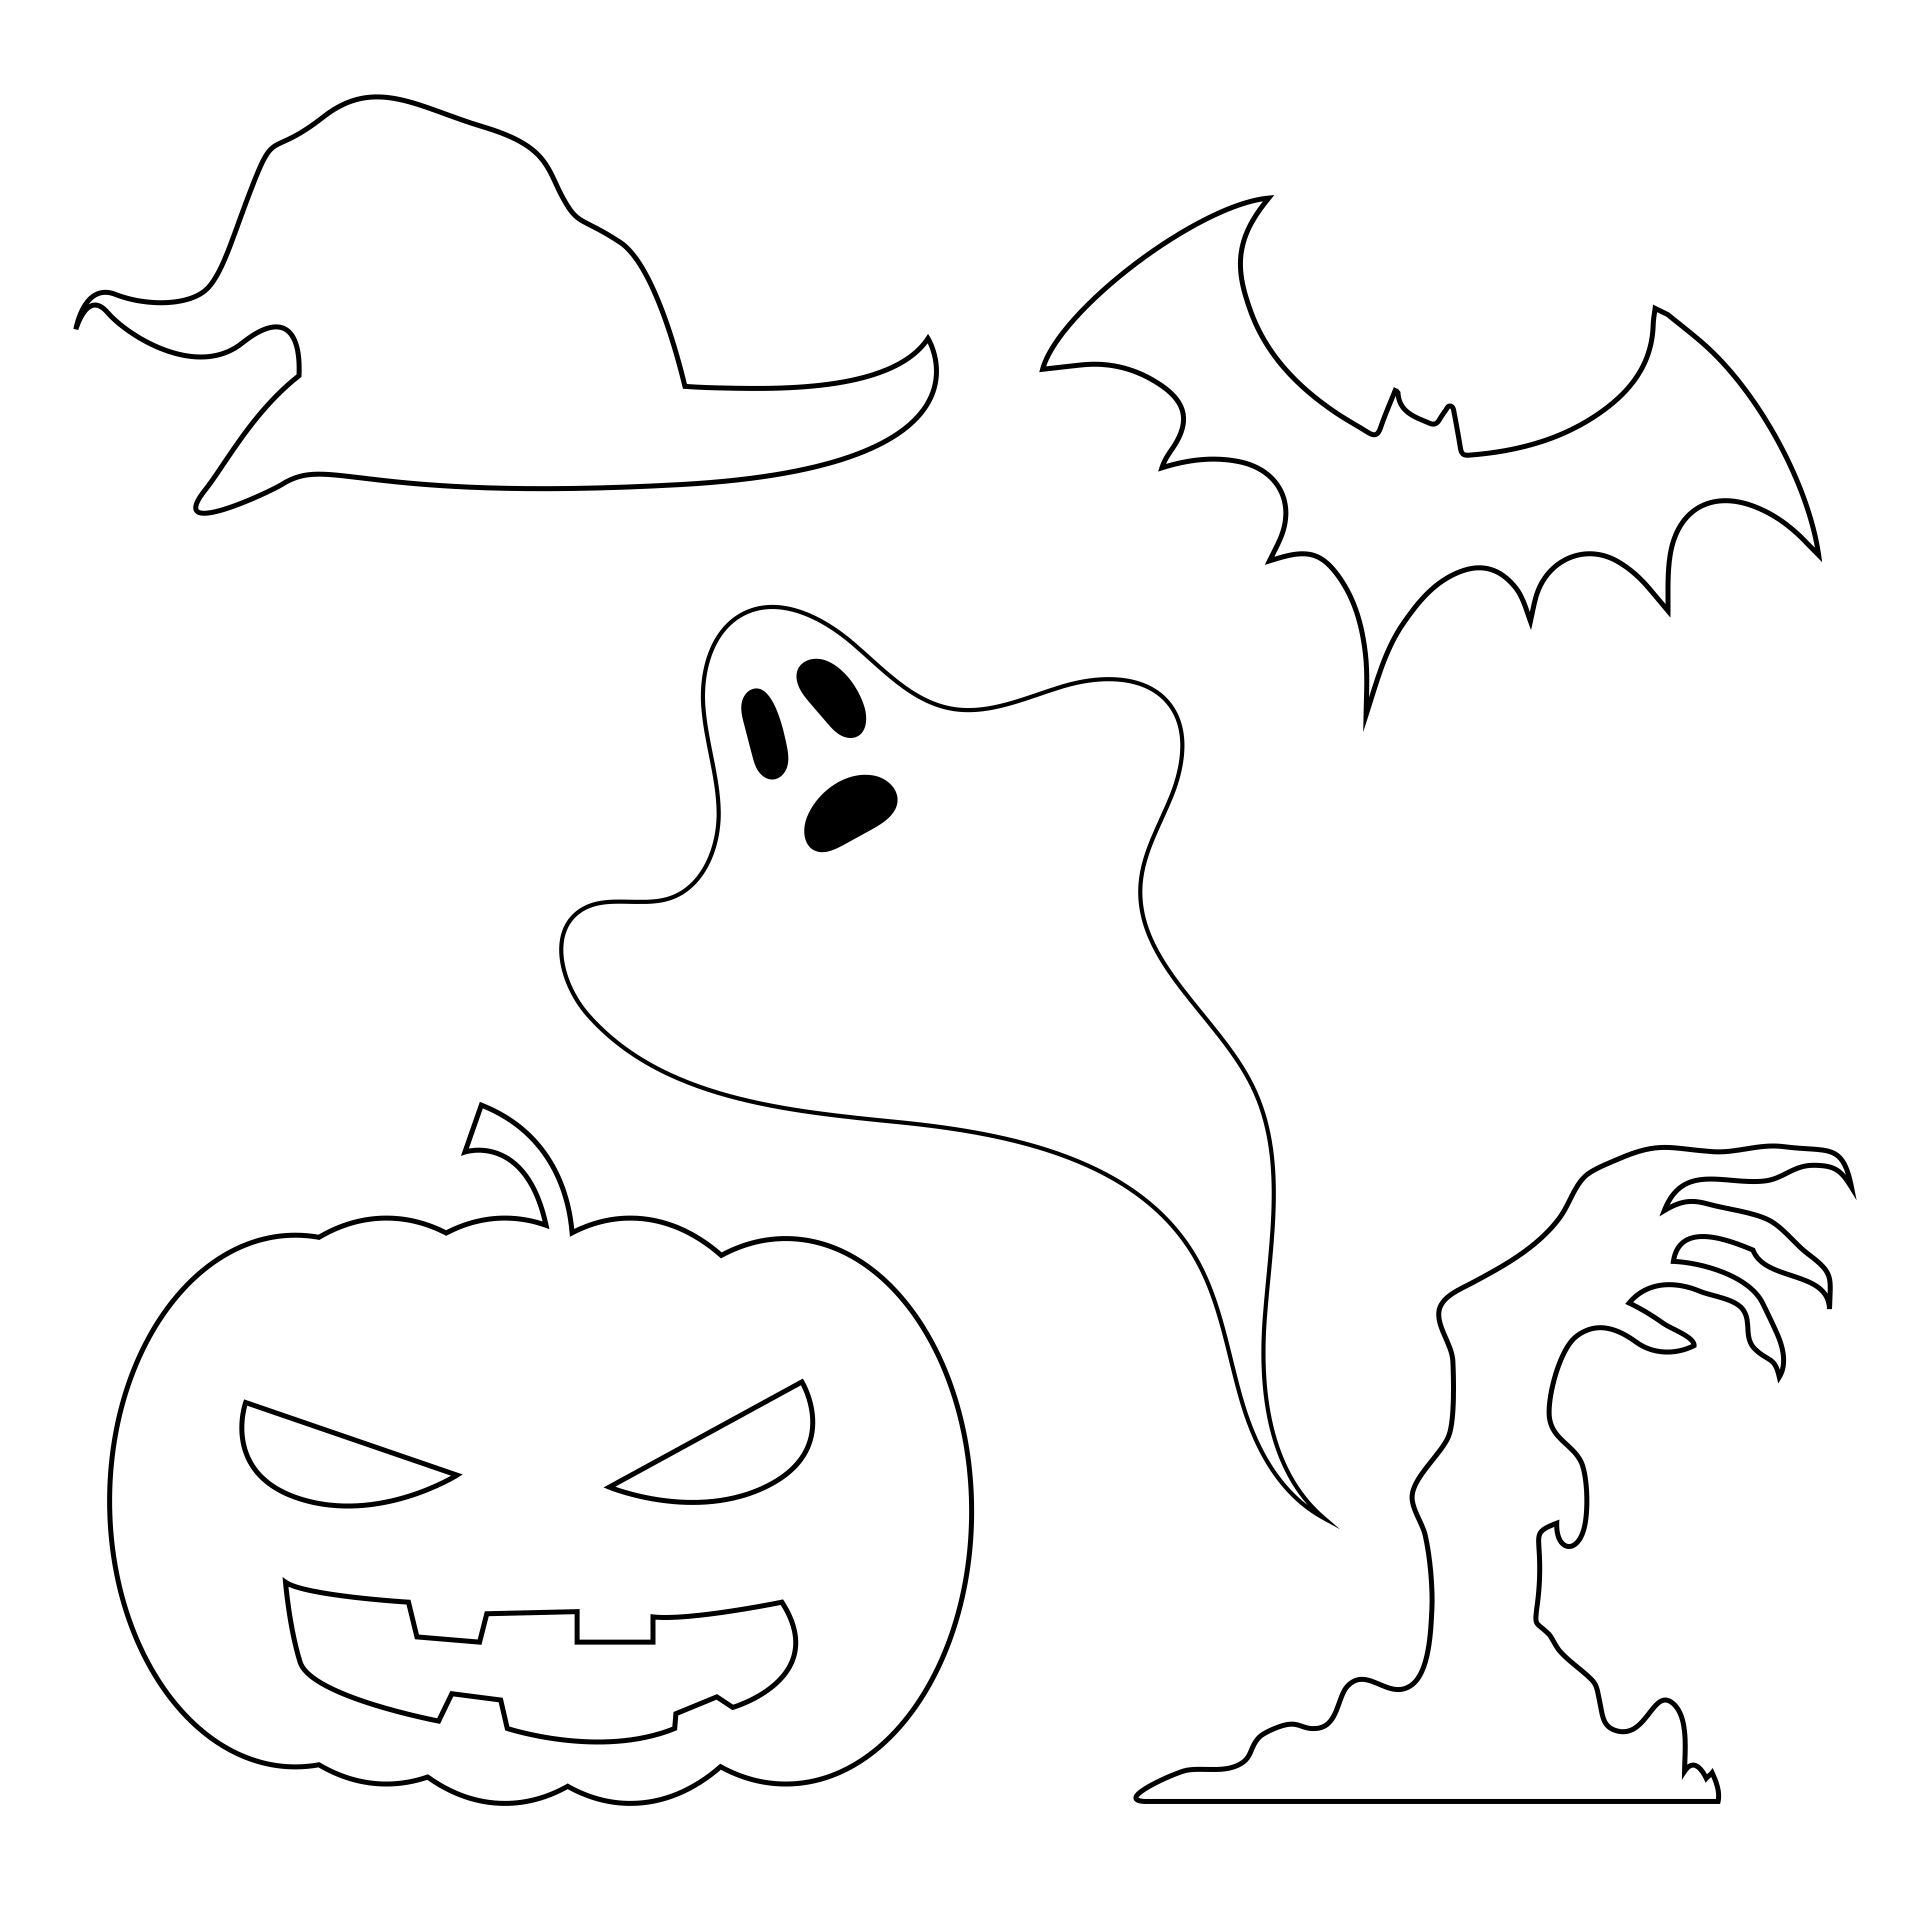 15-best-free-printable-halloween-cutouts-pdf-for-free-at-printablee